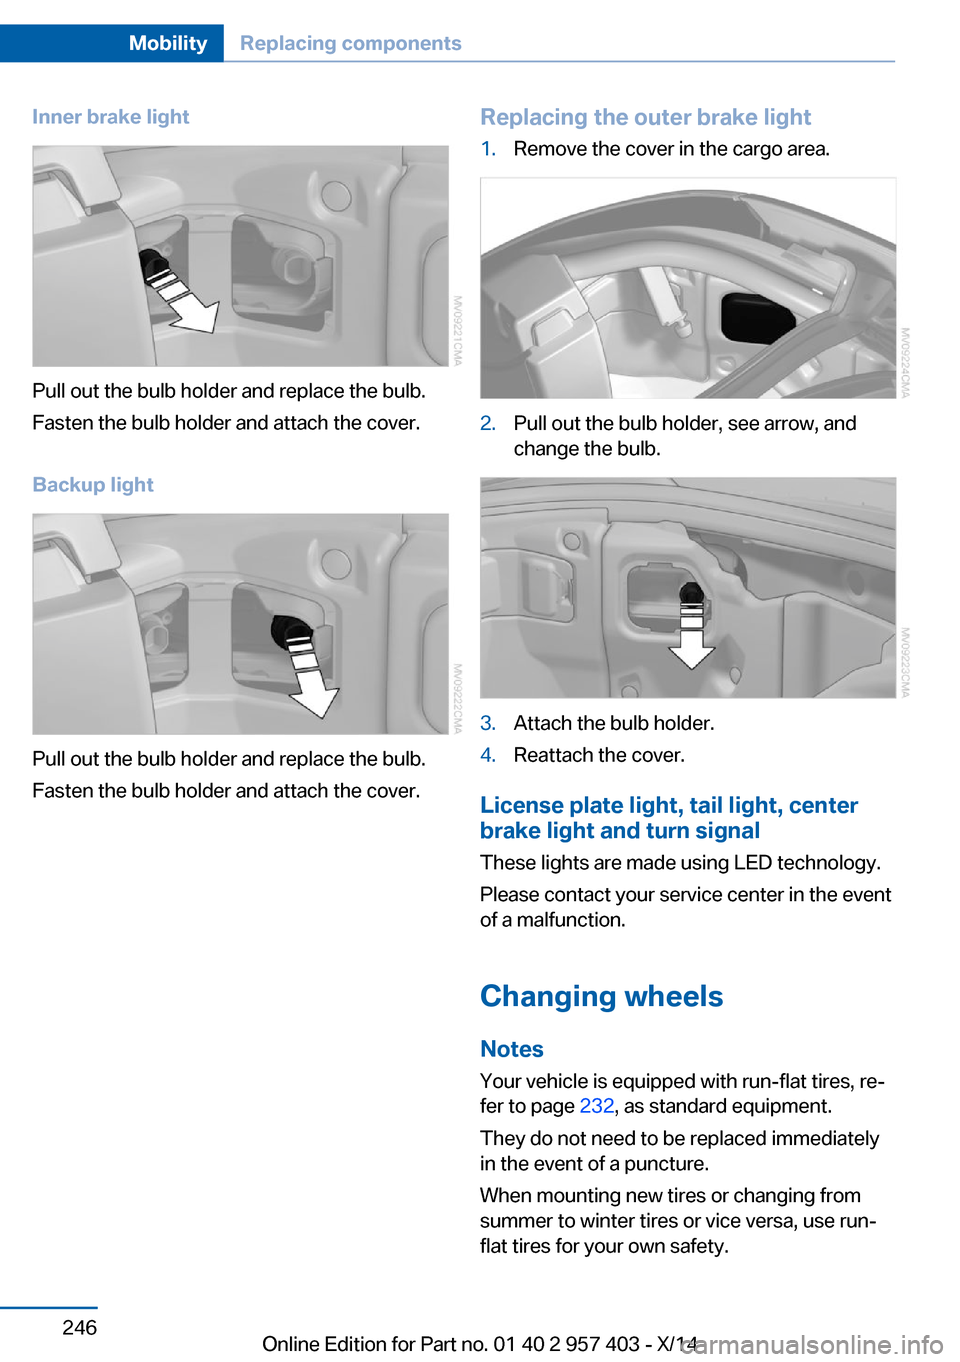 BMW Z4 2016 E89 Owners Manual Inner brake light
Pull out the bulb holder and replace the bulb.
Fasten the bulb holder and attach the cover.
Backup light
Pull out the bulb holder and replace the bulb.
Fasten the bulb holder and att